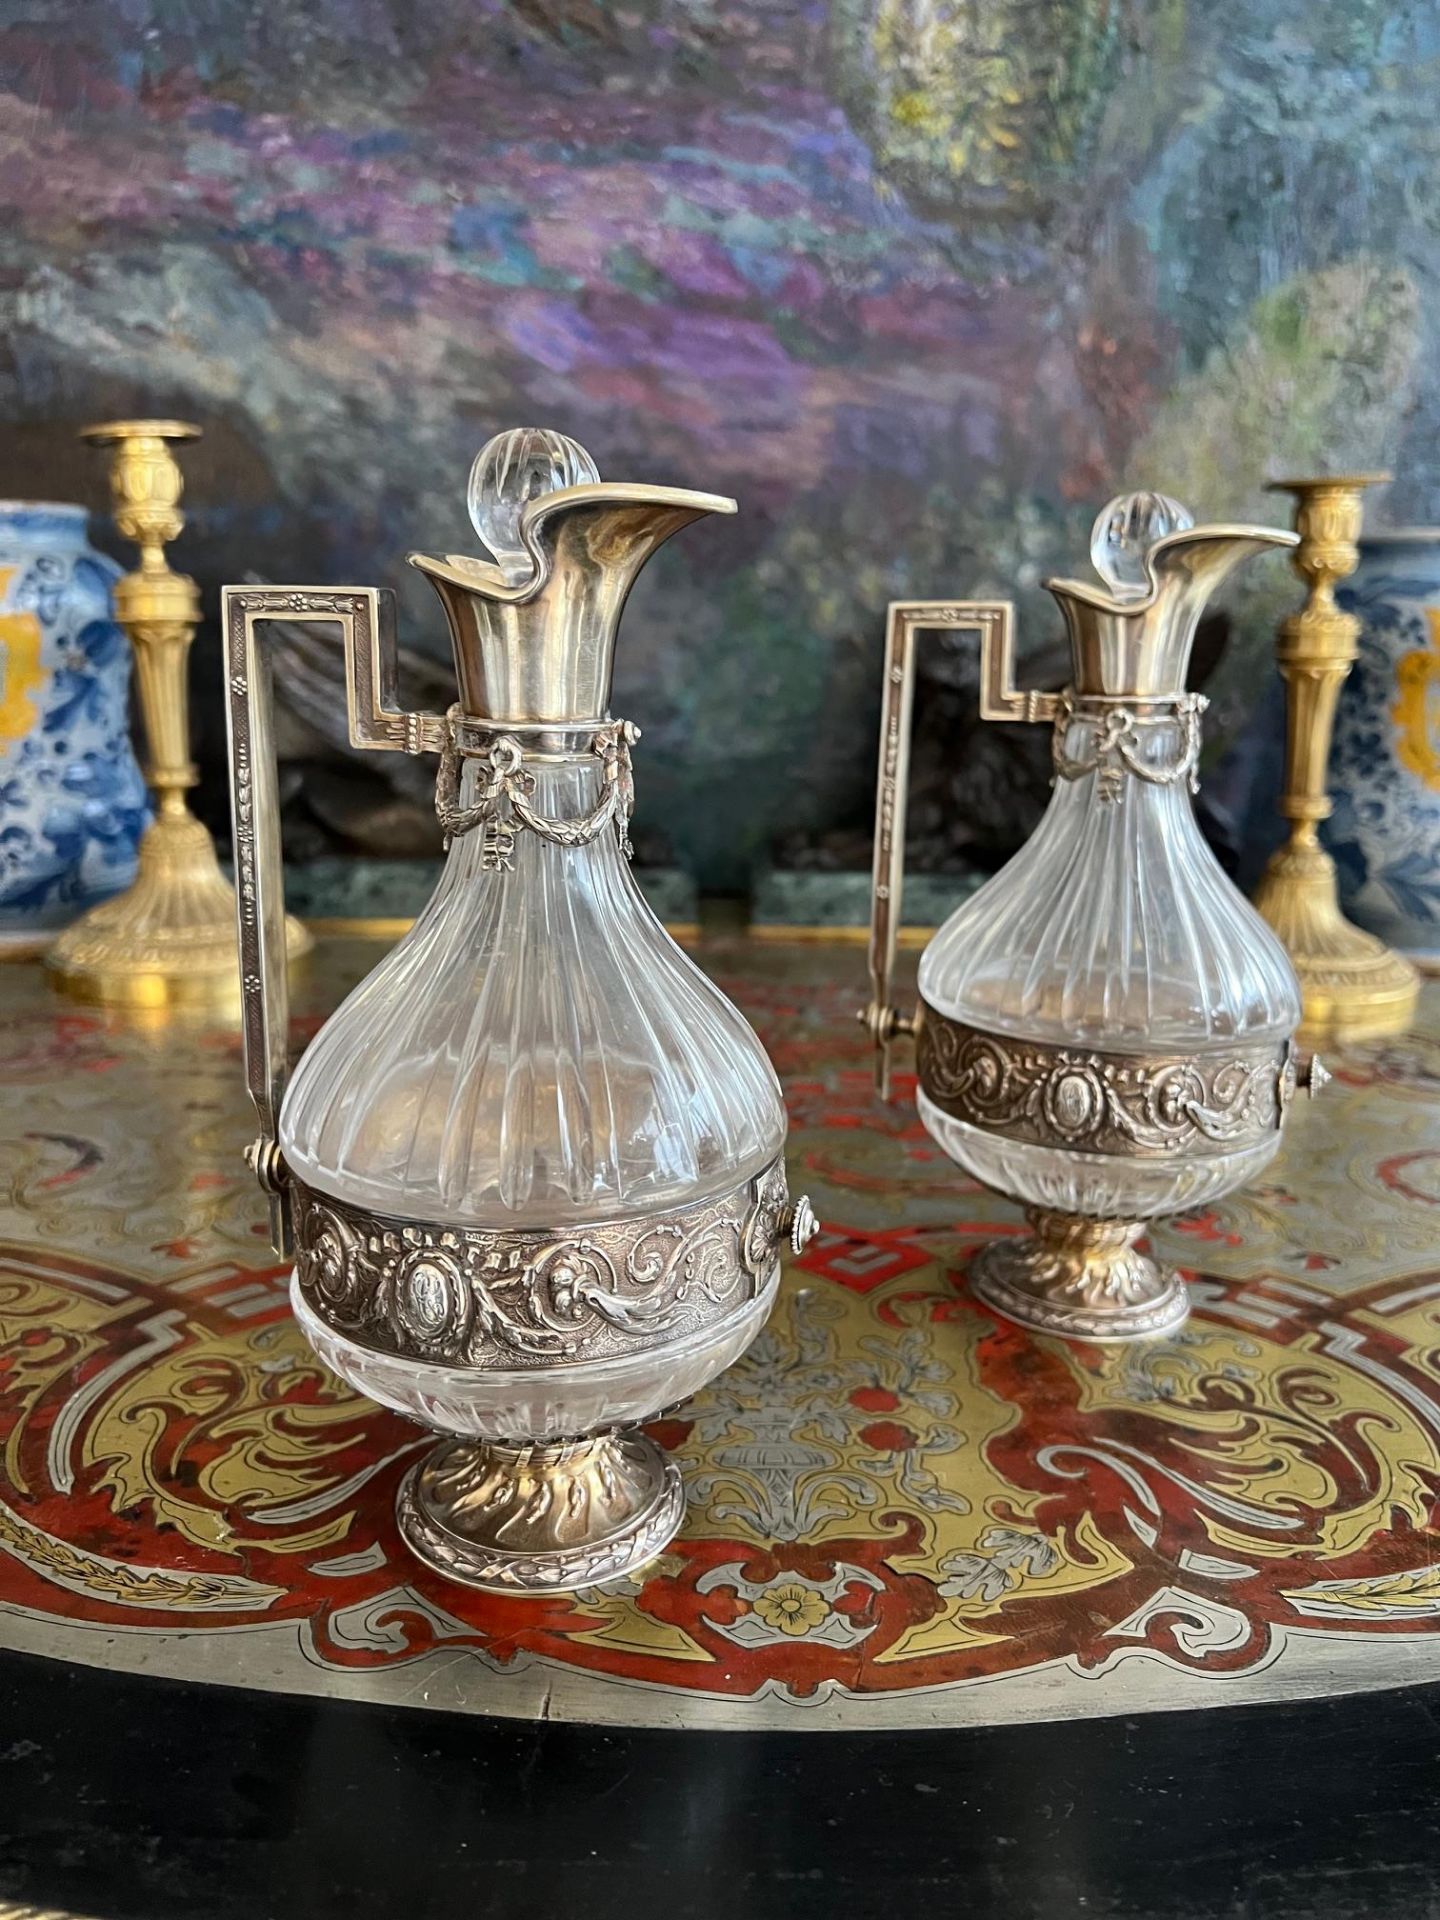 A PAIR OF 19TH CENTURY FRENCH SILVER AND GLASS LIQUOR JUGS - Image 7 of 7